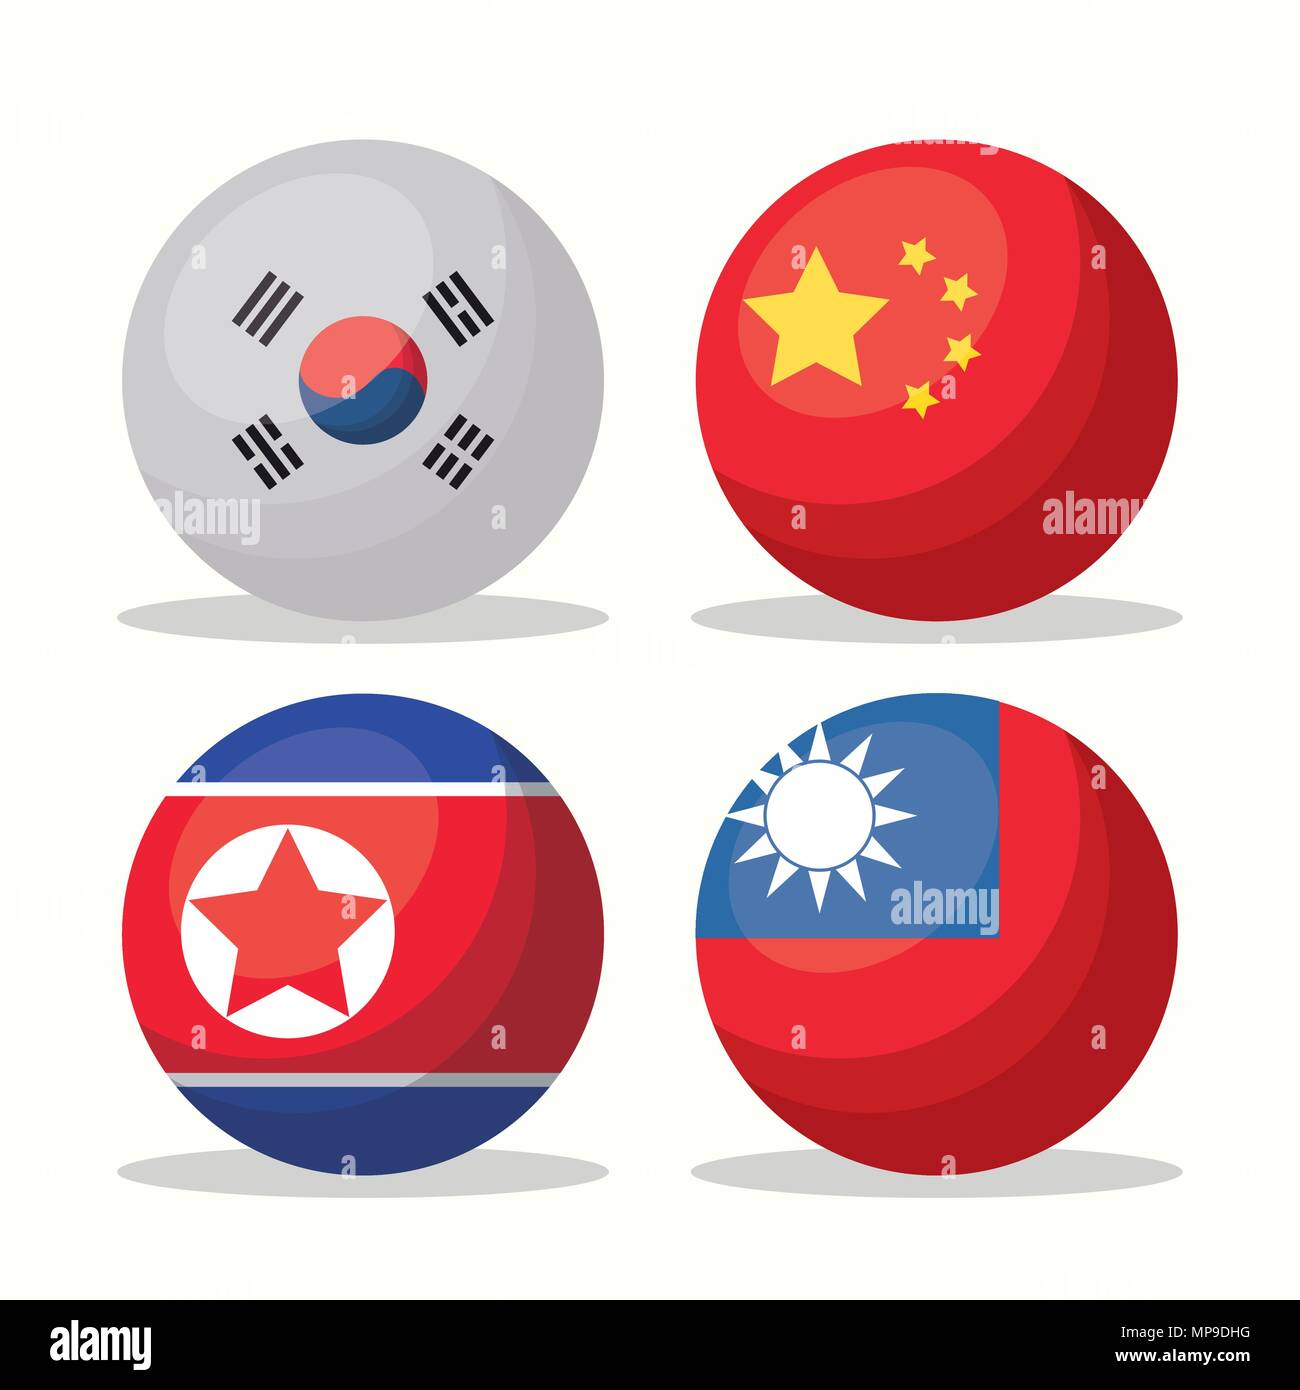 Icon set of Asian flags in button shapes over white background, colorful design. vector illustration Stock Vector